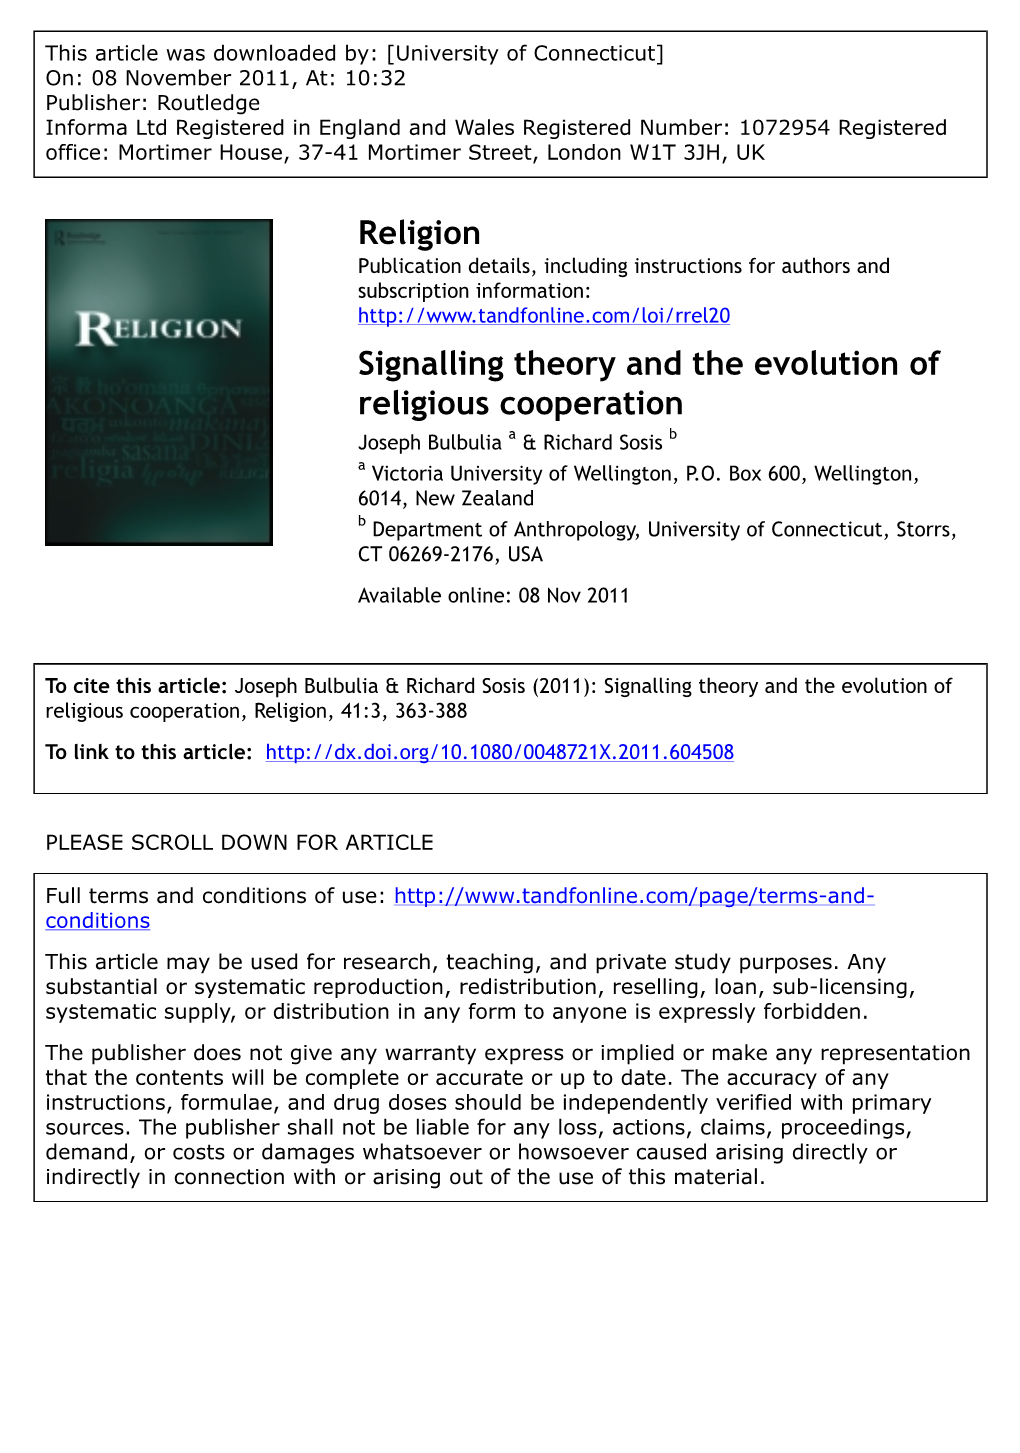 Signalling Theory and the Evolution of Religious Cooperation..Pdf